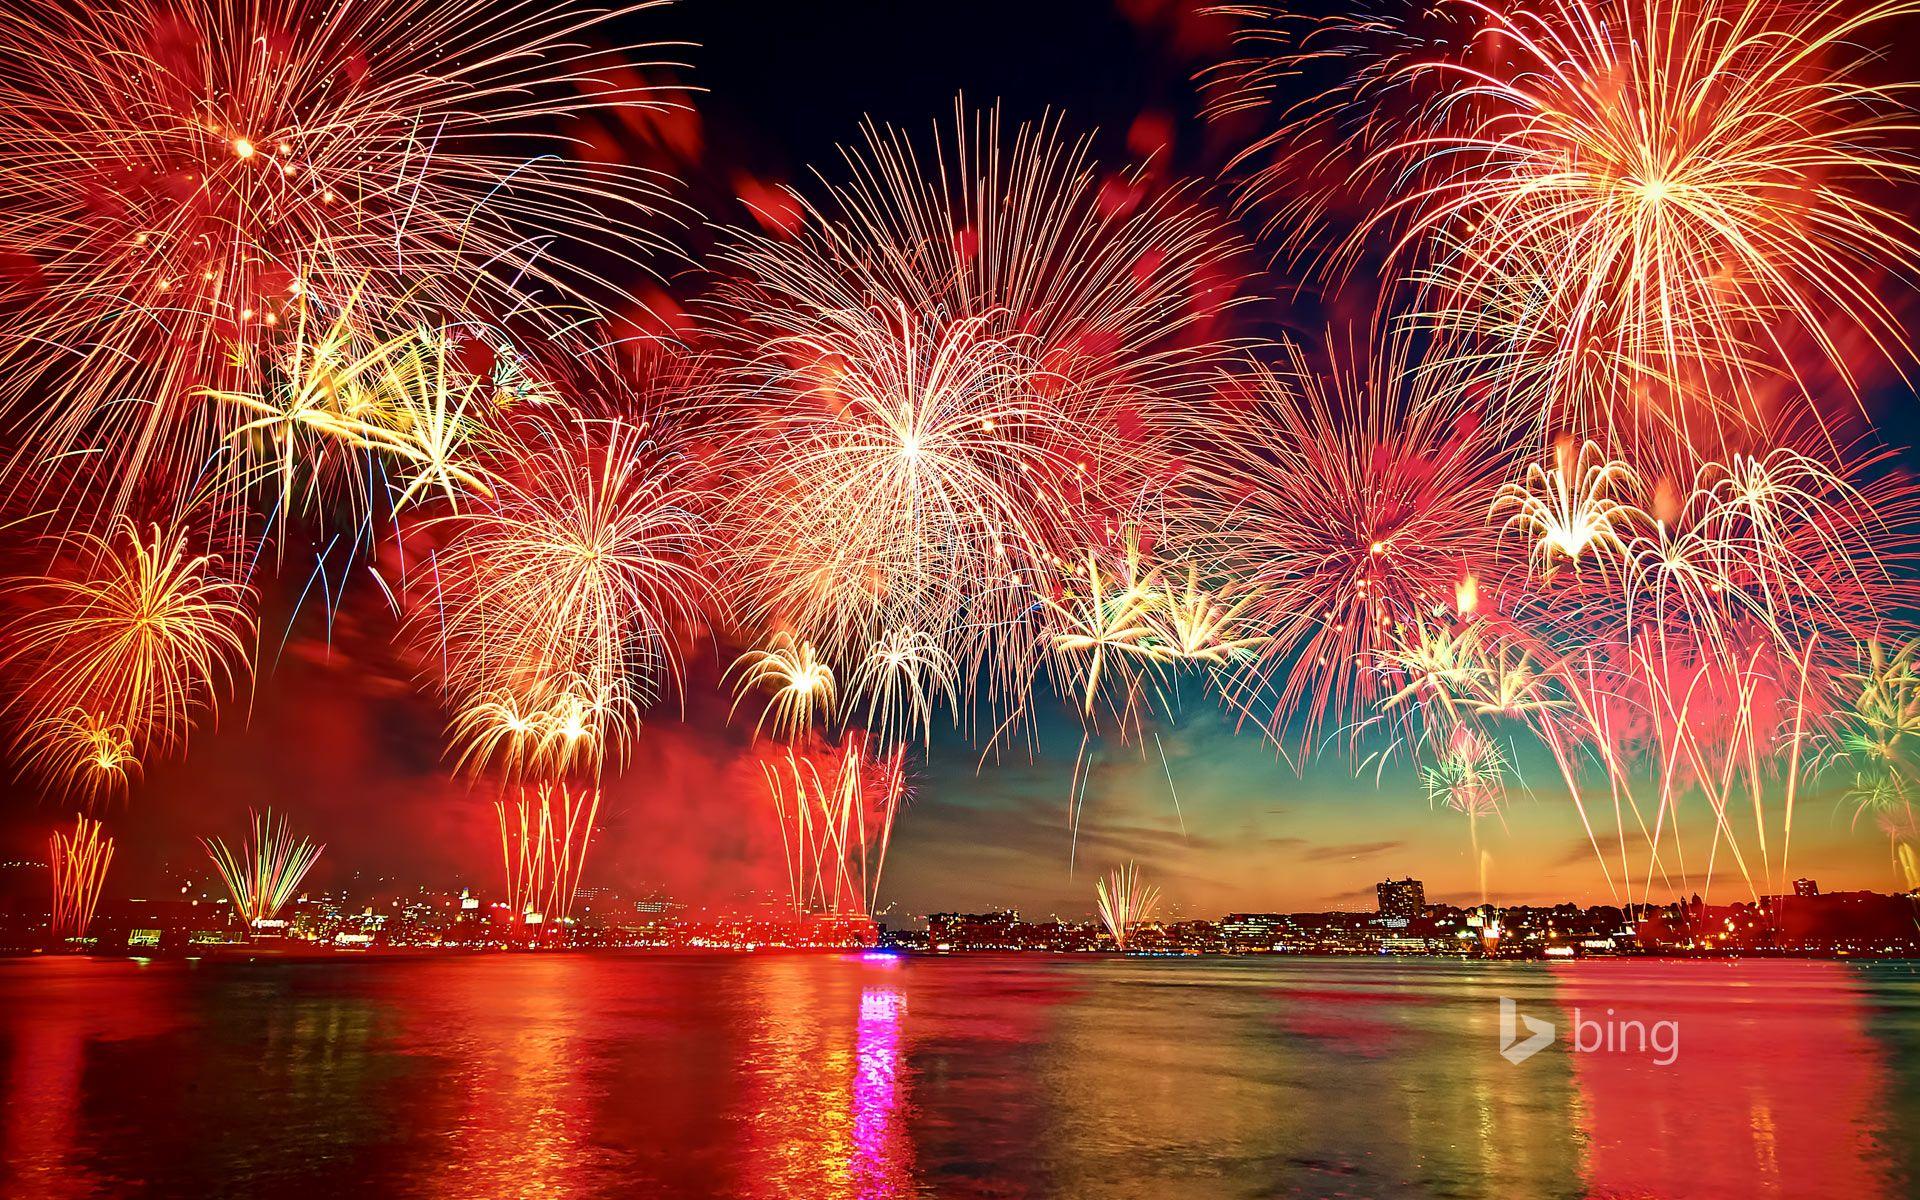 Fireworks display in New York City as seen over the Hudson River